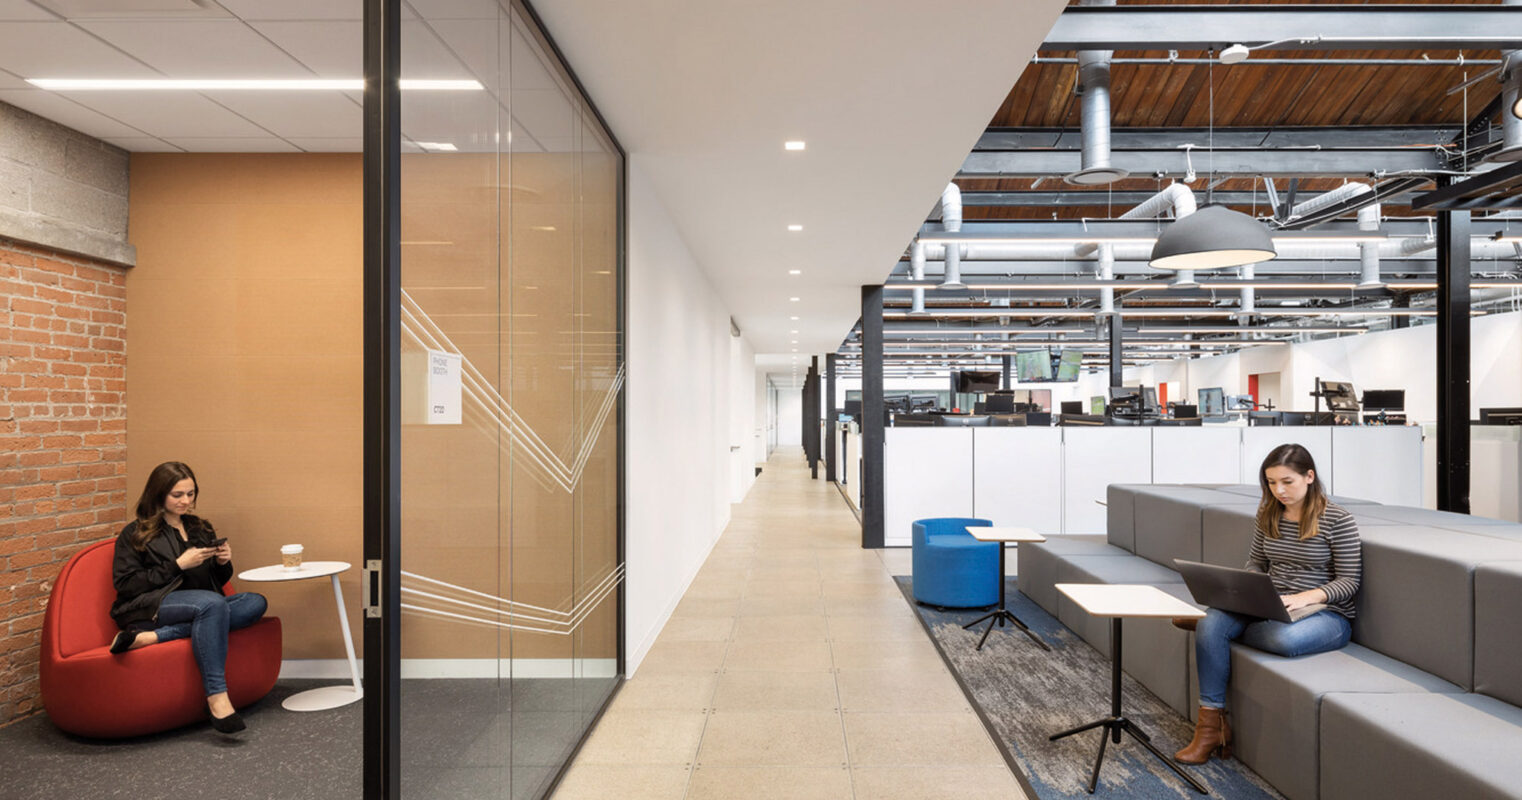 Modern office space with exposed ceiling beams, featuring an open plan seating arrangement with individual workstations. A communal lounge area includes colorful, contemporary furnishings and glass partitions, creating a blend of private and collaborative environments.